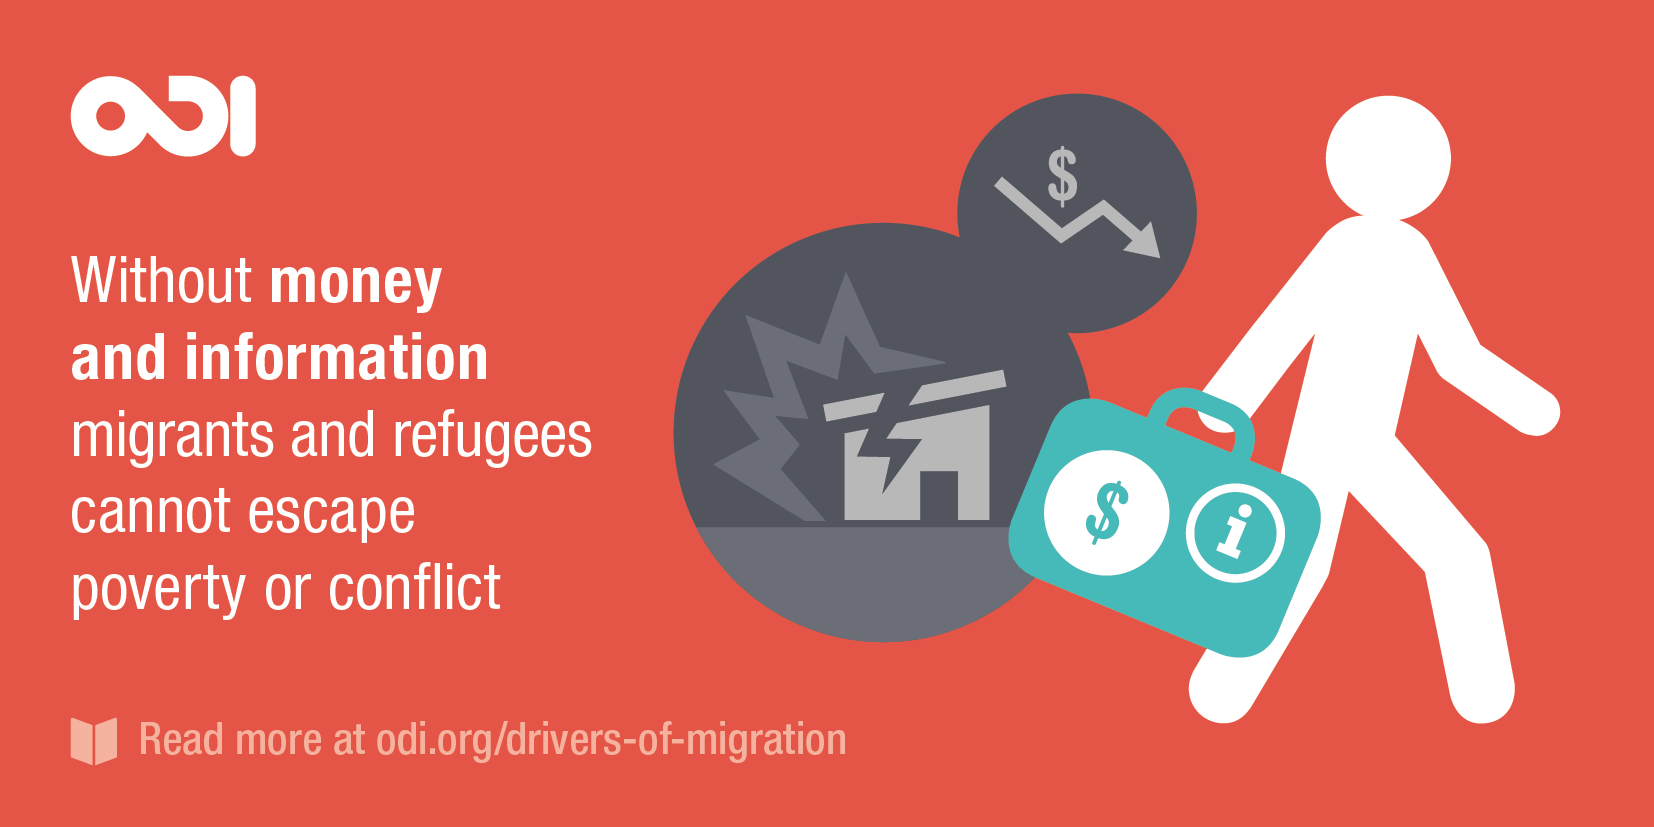 Illustration: without money and information, migrants and refugees cannot escape poverty or conflict